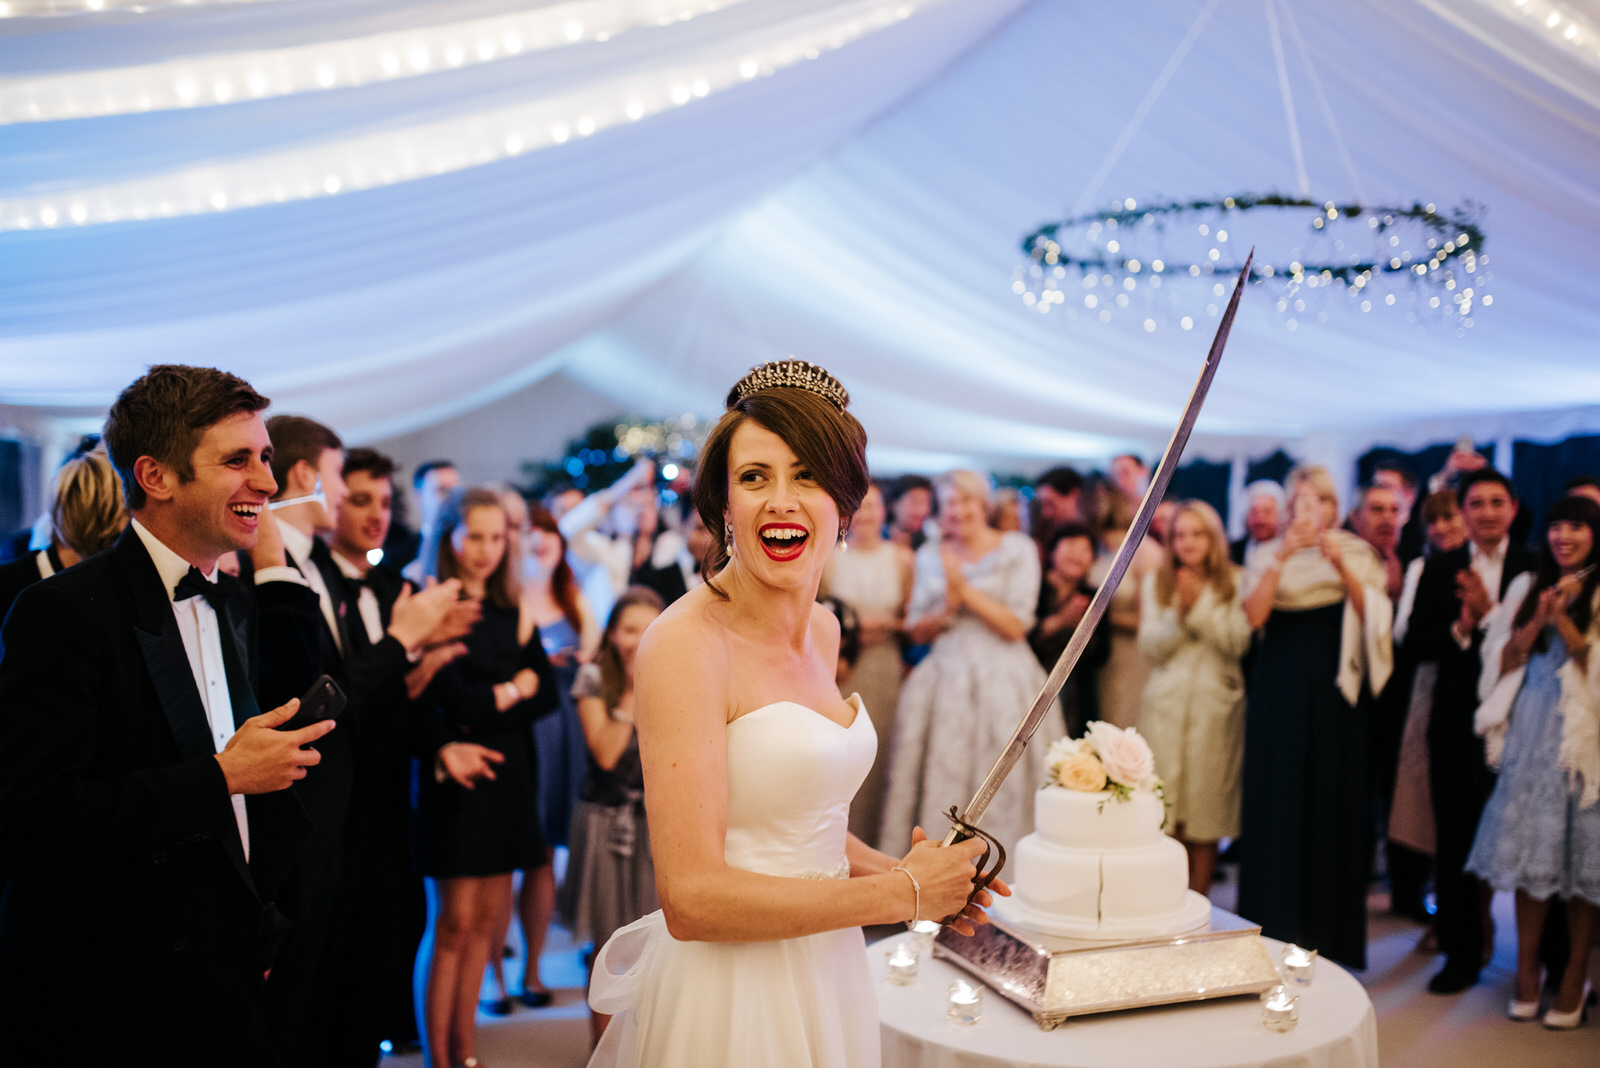 Bride holds military sword after cutting wedding cake as guests 